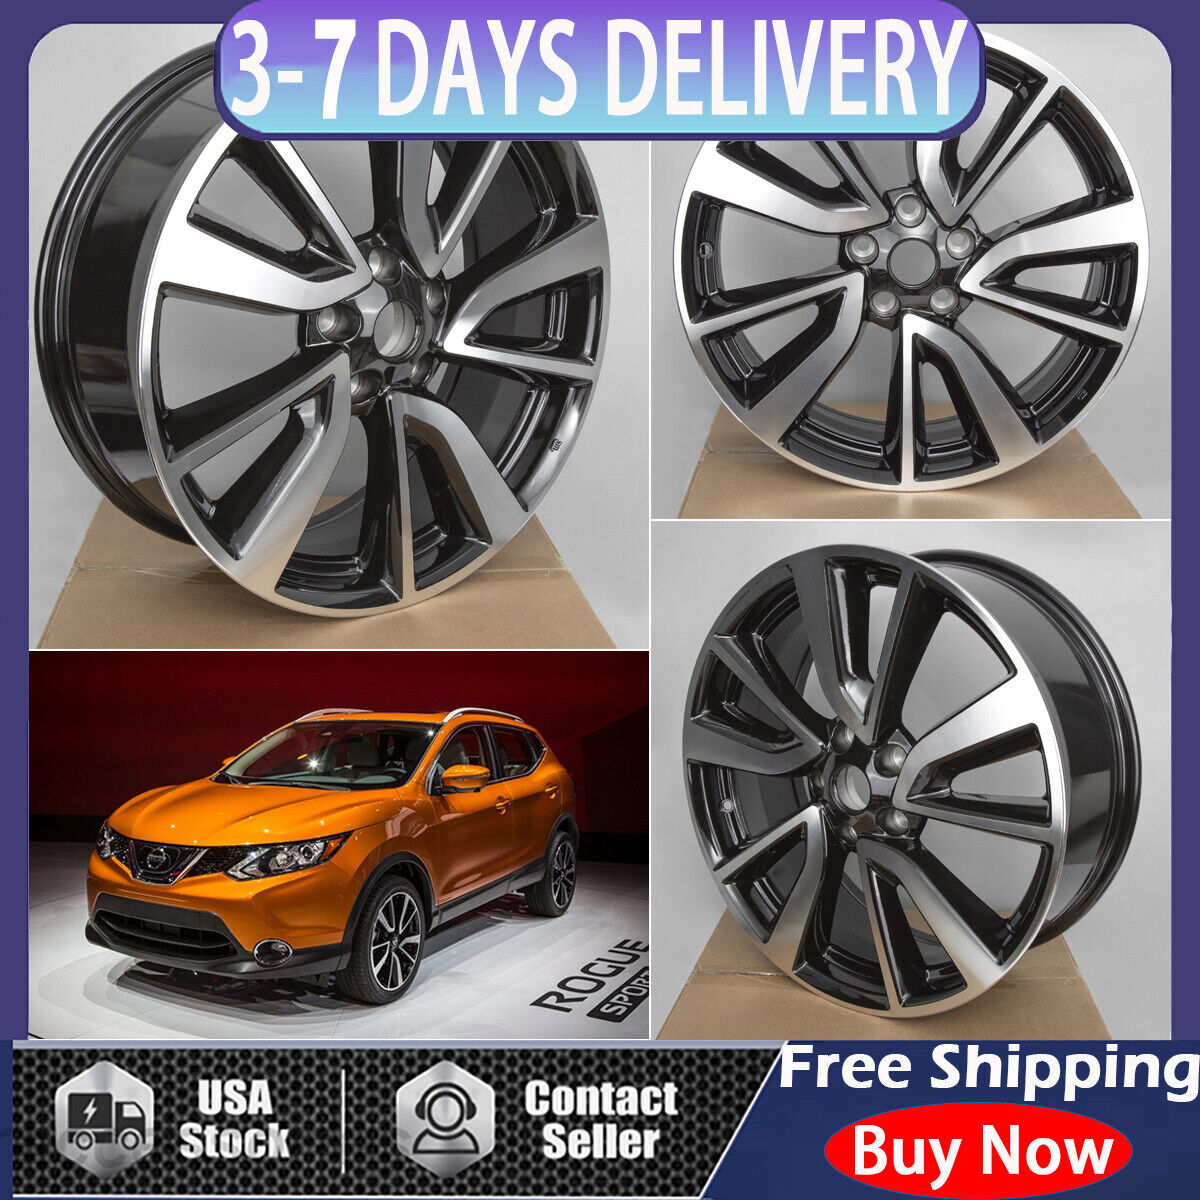 NEW 19 INCH REPLACEMENT ALLOY WHEEL FOR NISSAN ROGUE SPORT 2017-2020 RIM 62748